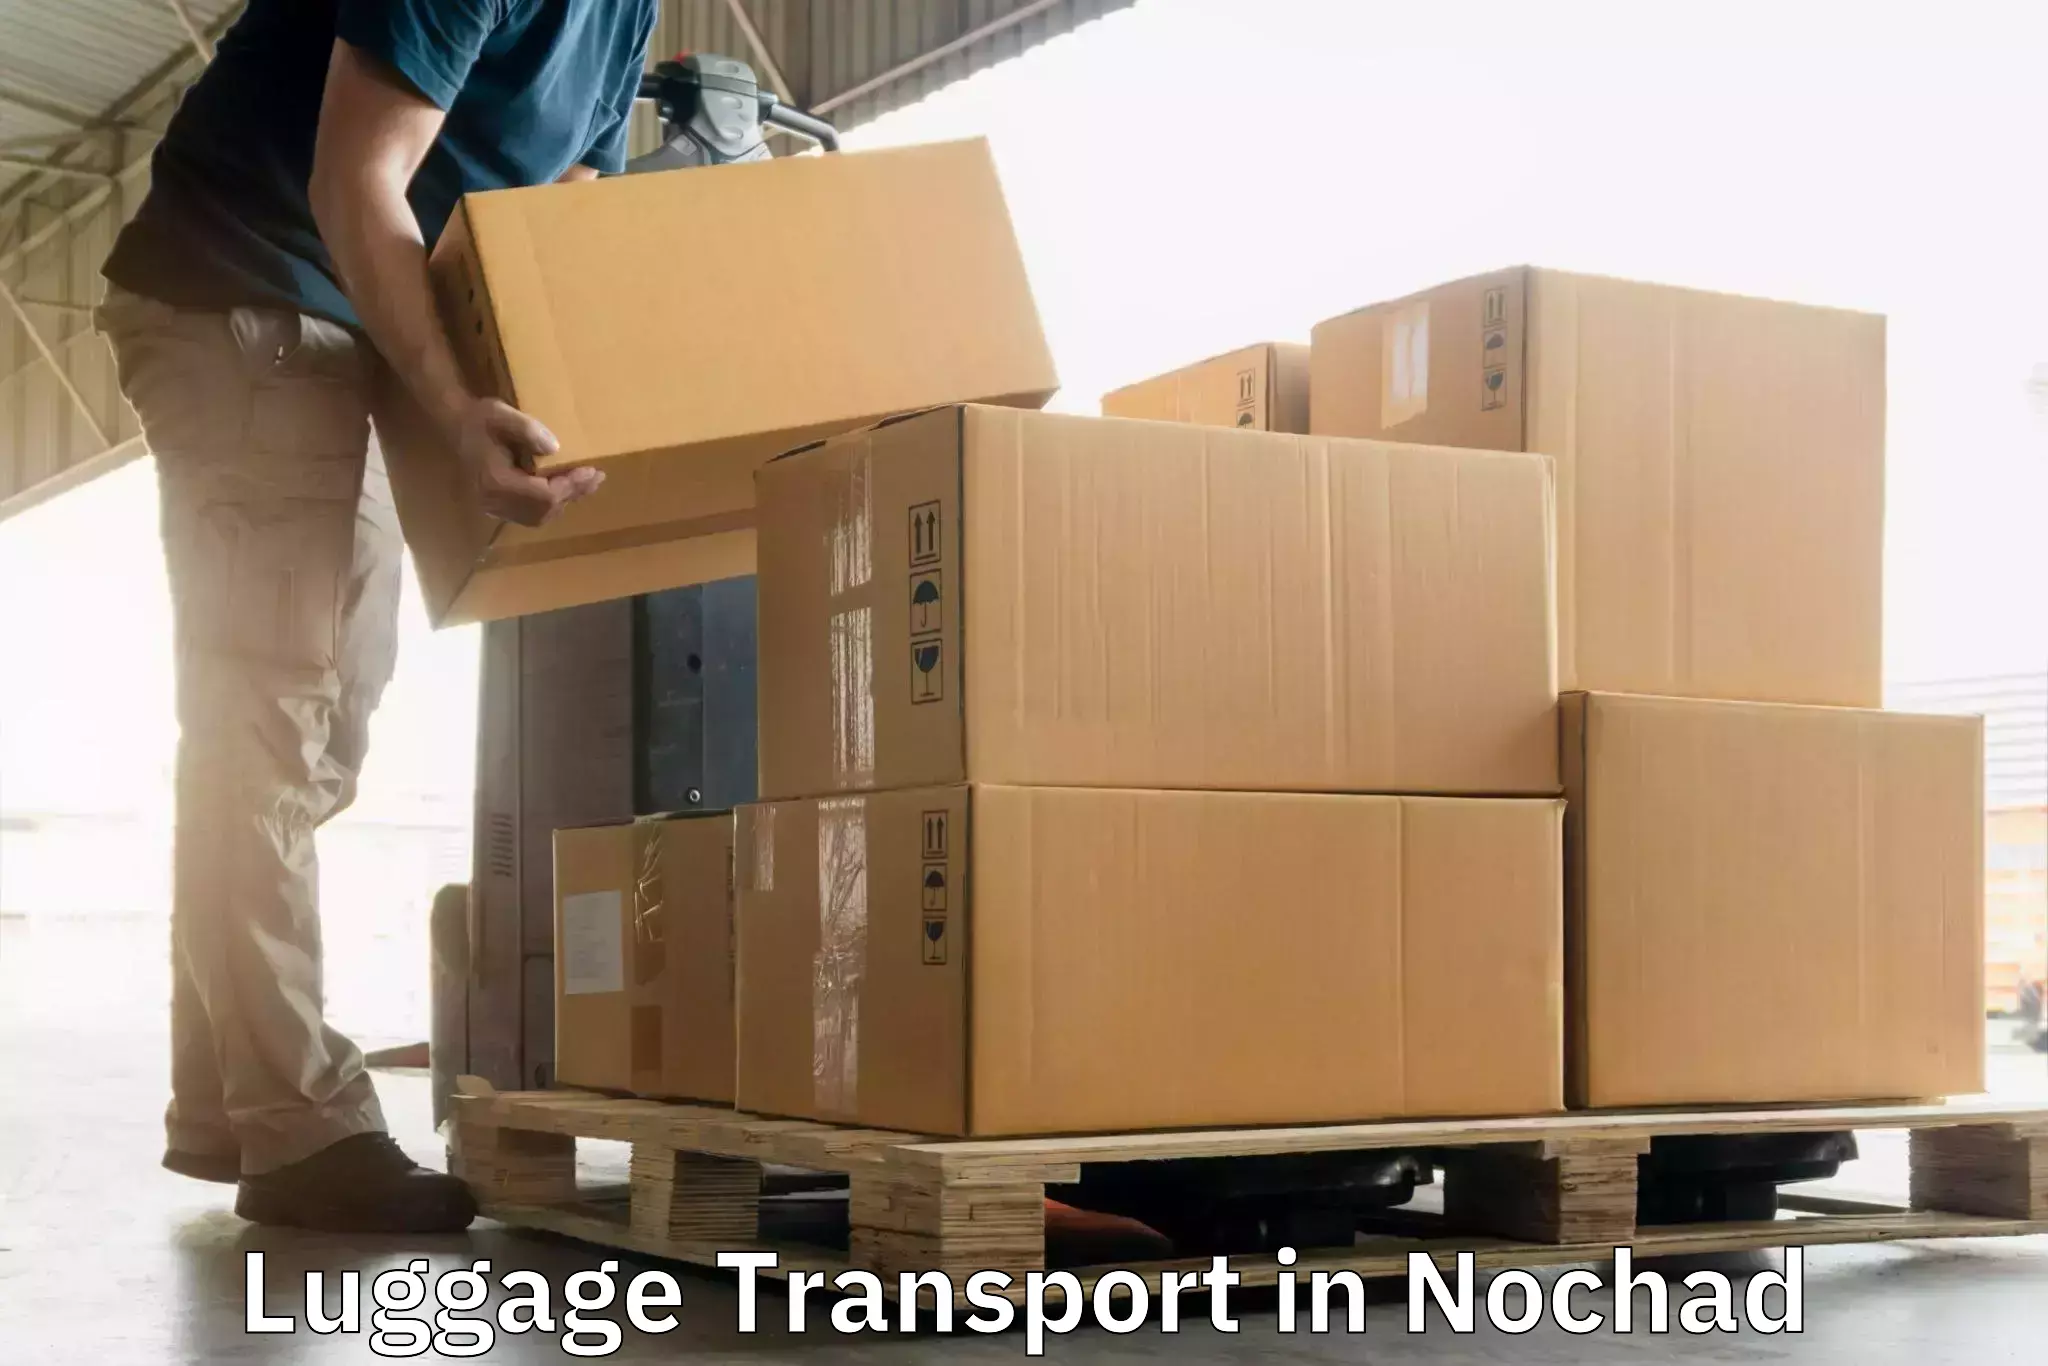 Luggage delivery system in Nochad